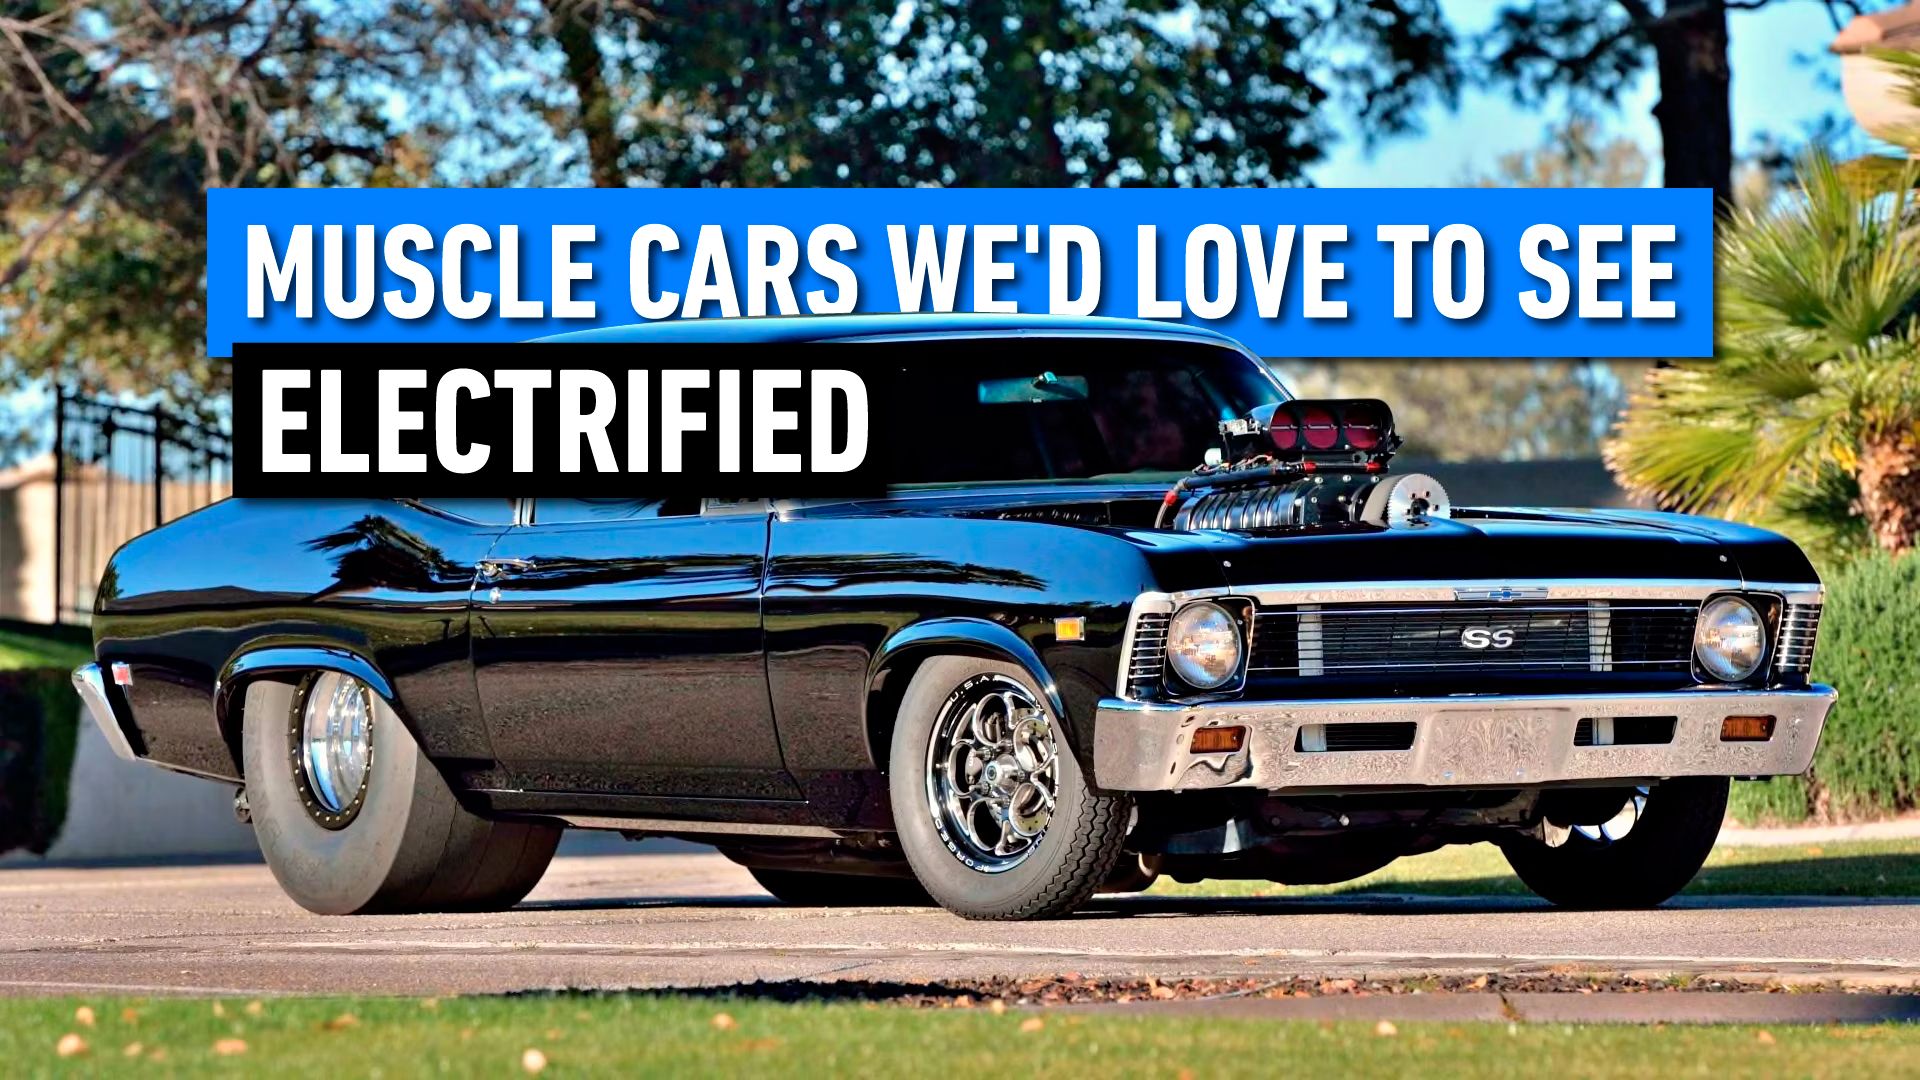 10 electric muscle cars we can’t wait to see in the future